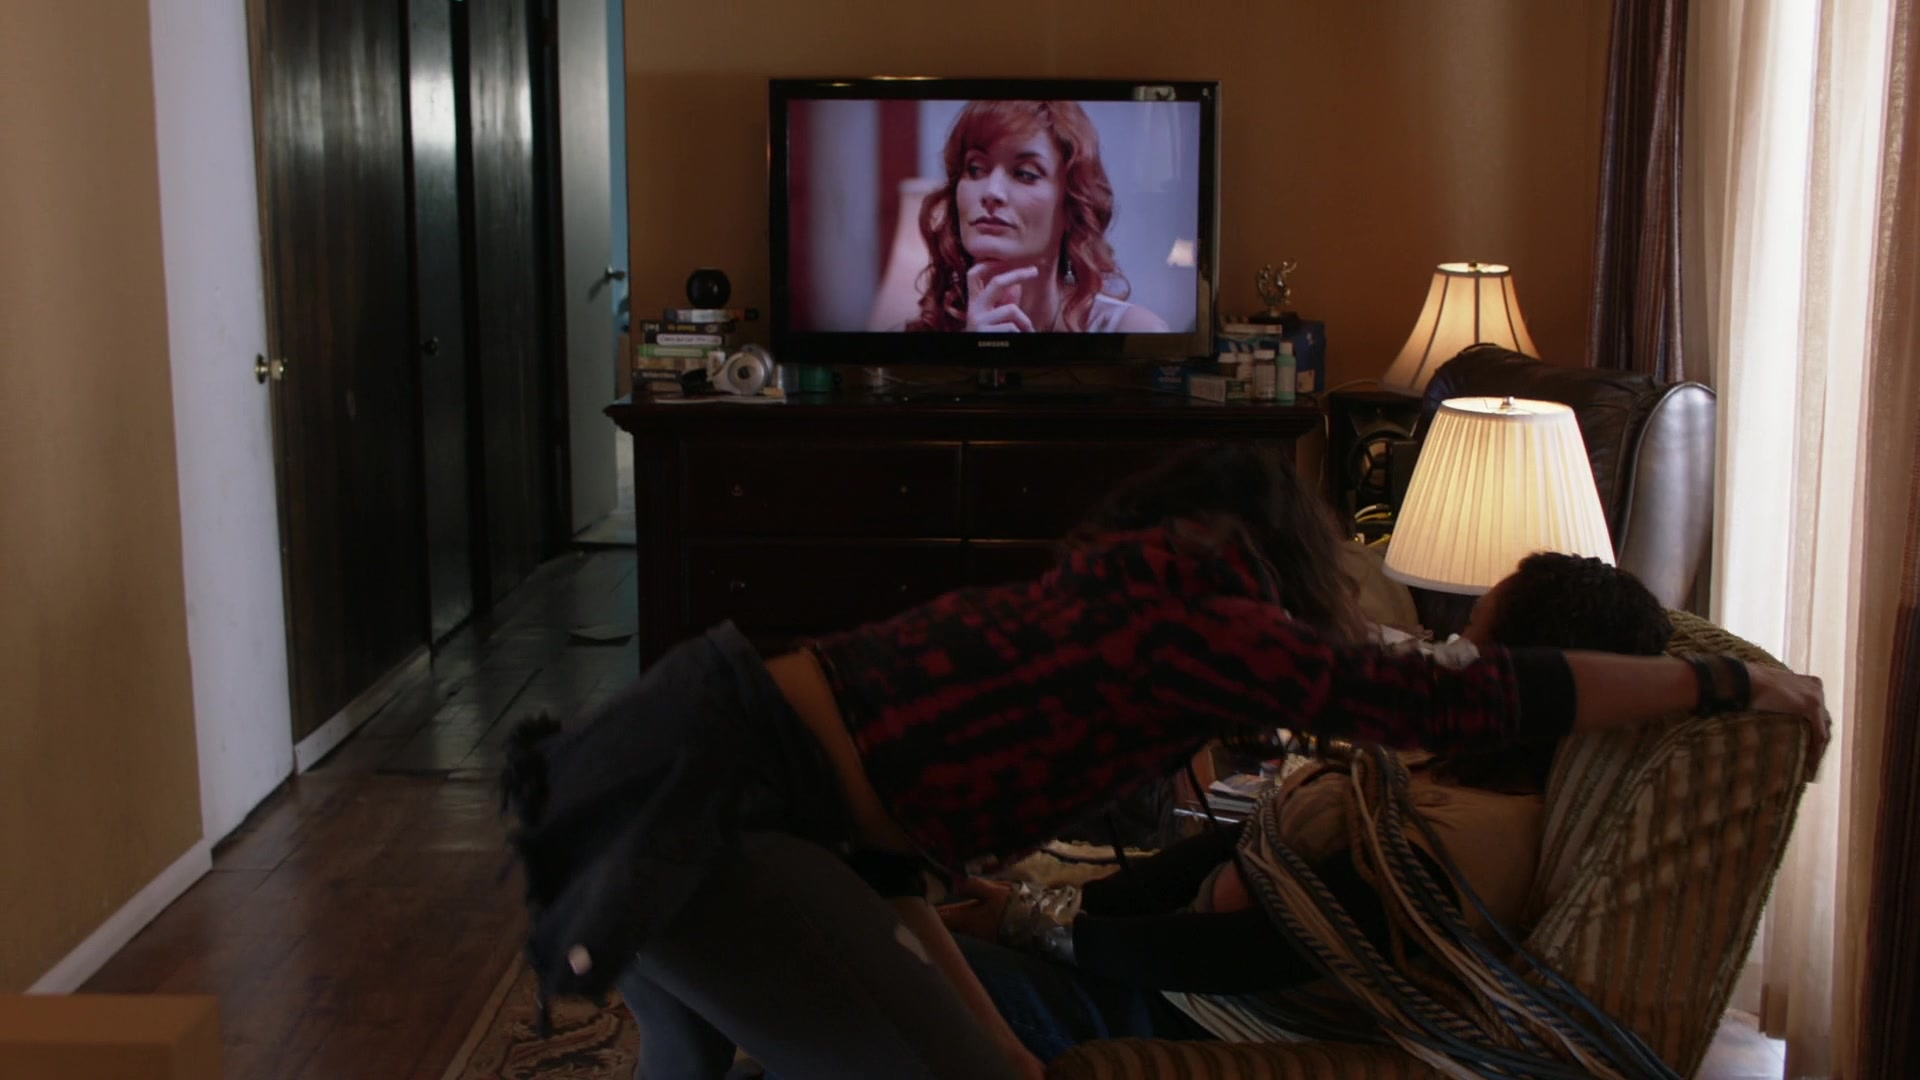 Samsung Television In Shameless S11e11 The Fickle Lady Is Calling It